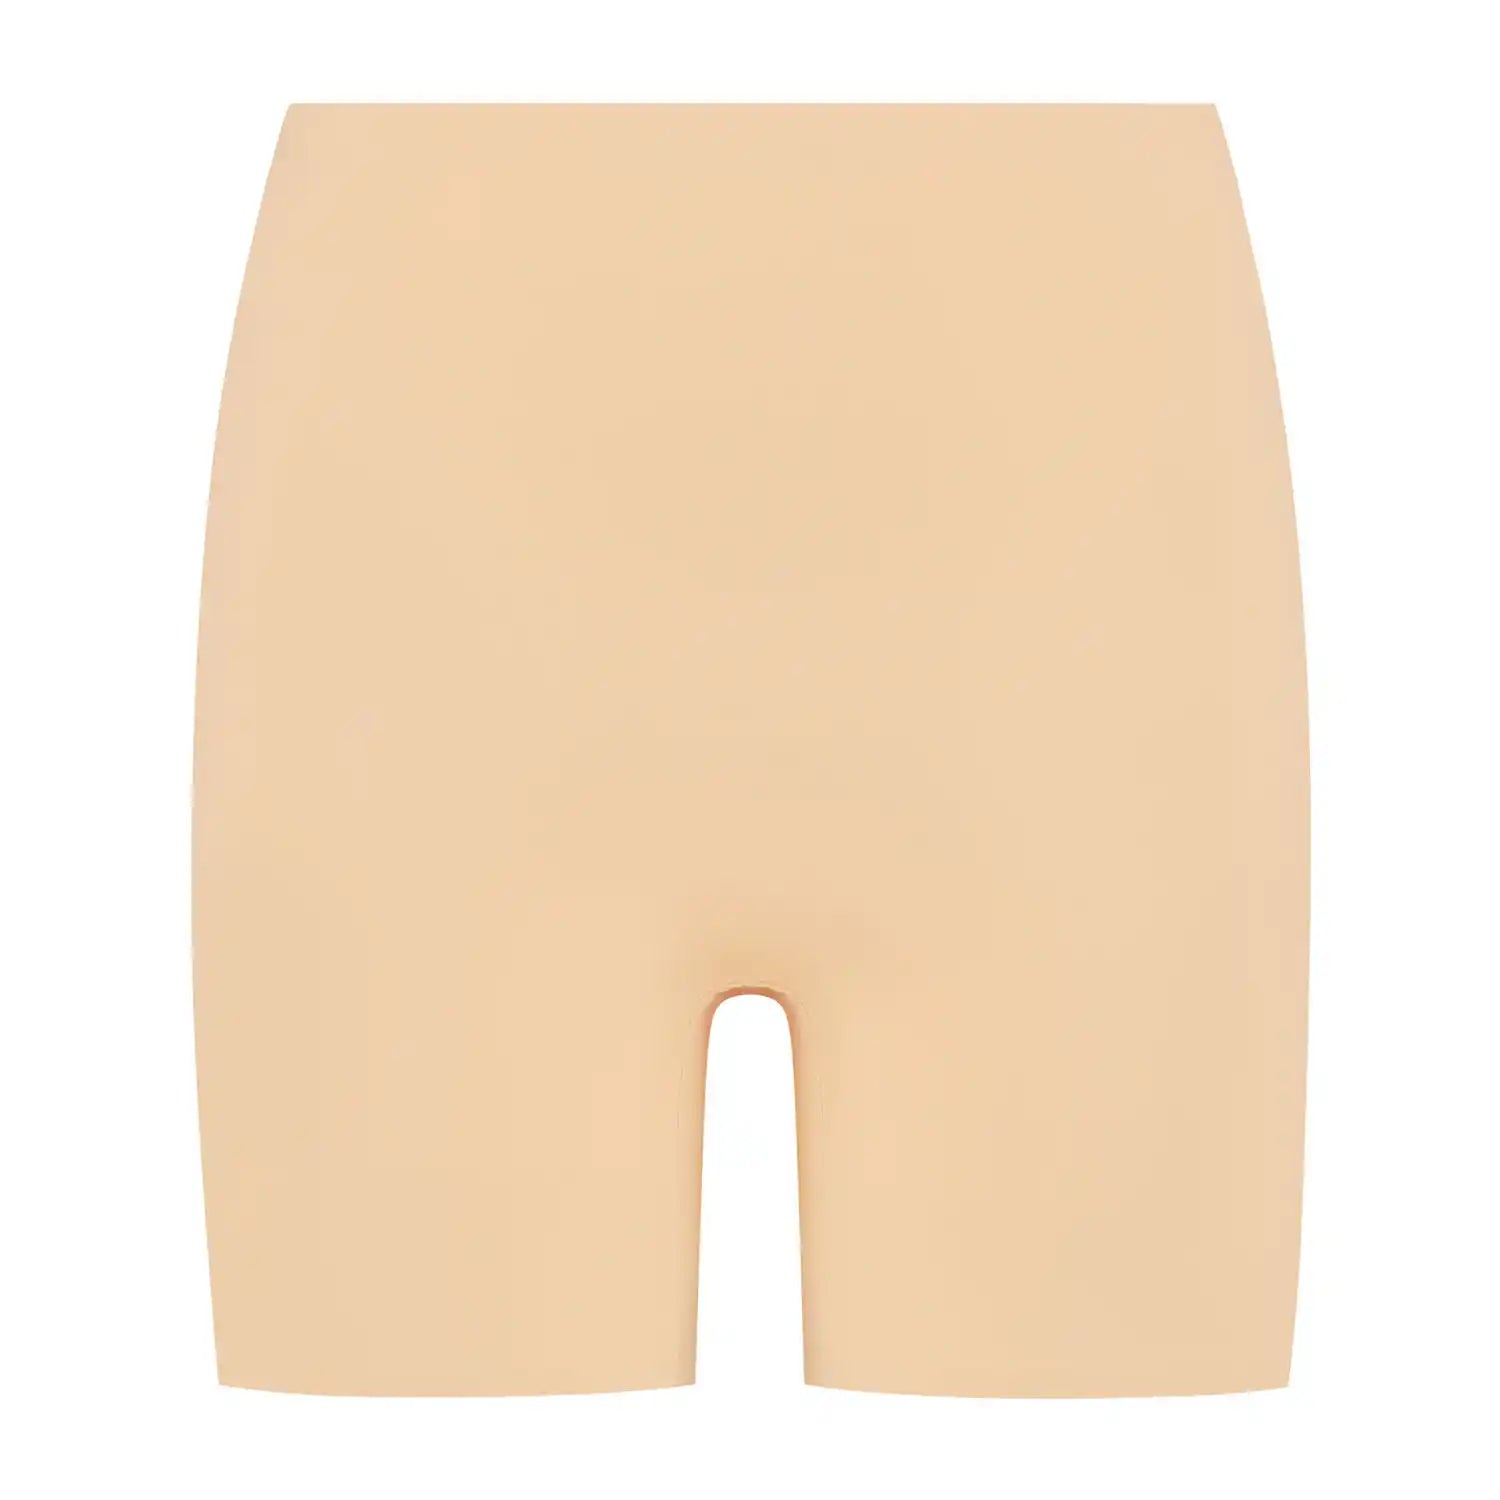 Bye Bra Invisible Short - Beige 1 Shaws Department Stores